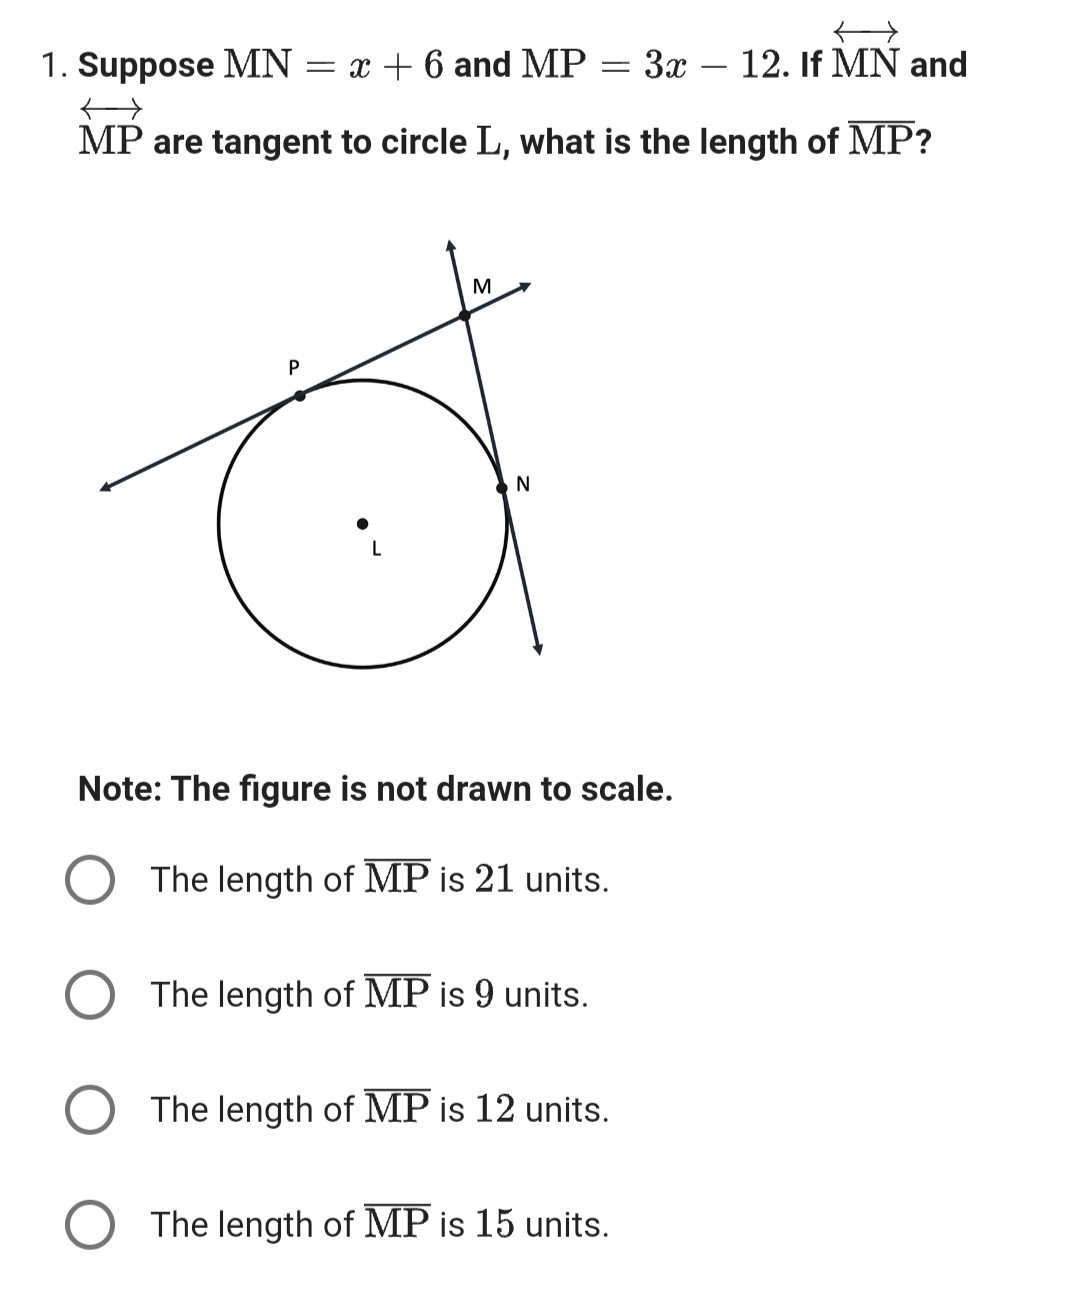 1. Suppose MN = x + 6 and MP
3x 12. If MN and
MP are tangent to circle L, what is the length of MP?
P
M
N
=
Note: The figure is not drawn to scale.
The length of MP is 21 units.
The length of MP is 9 units.
The length of MP is 12 units.
The length of MP is 15 units.
←
-